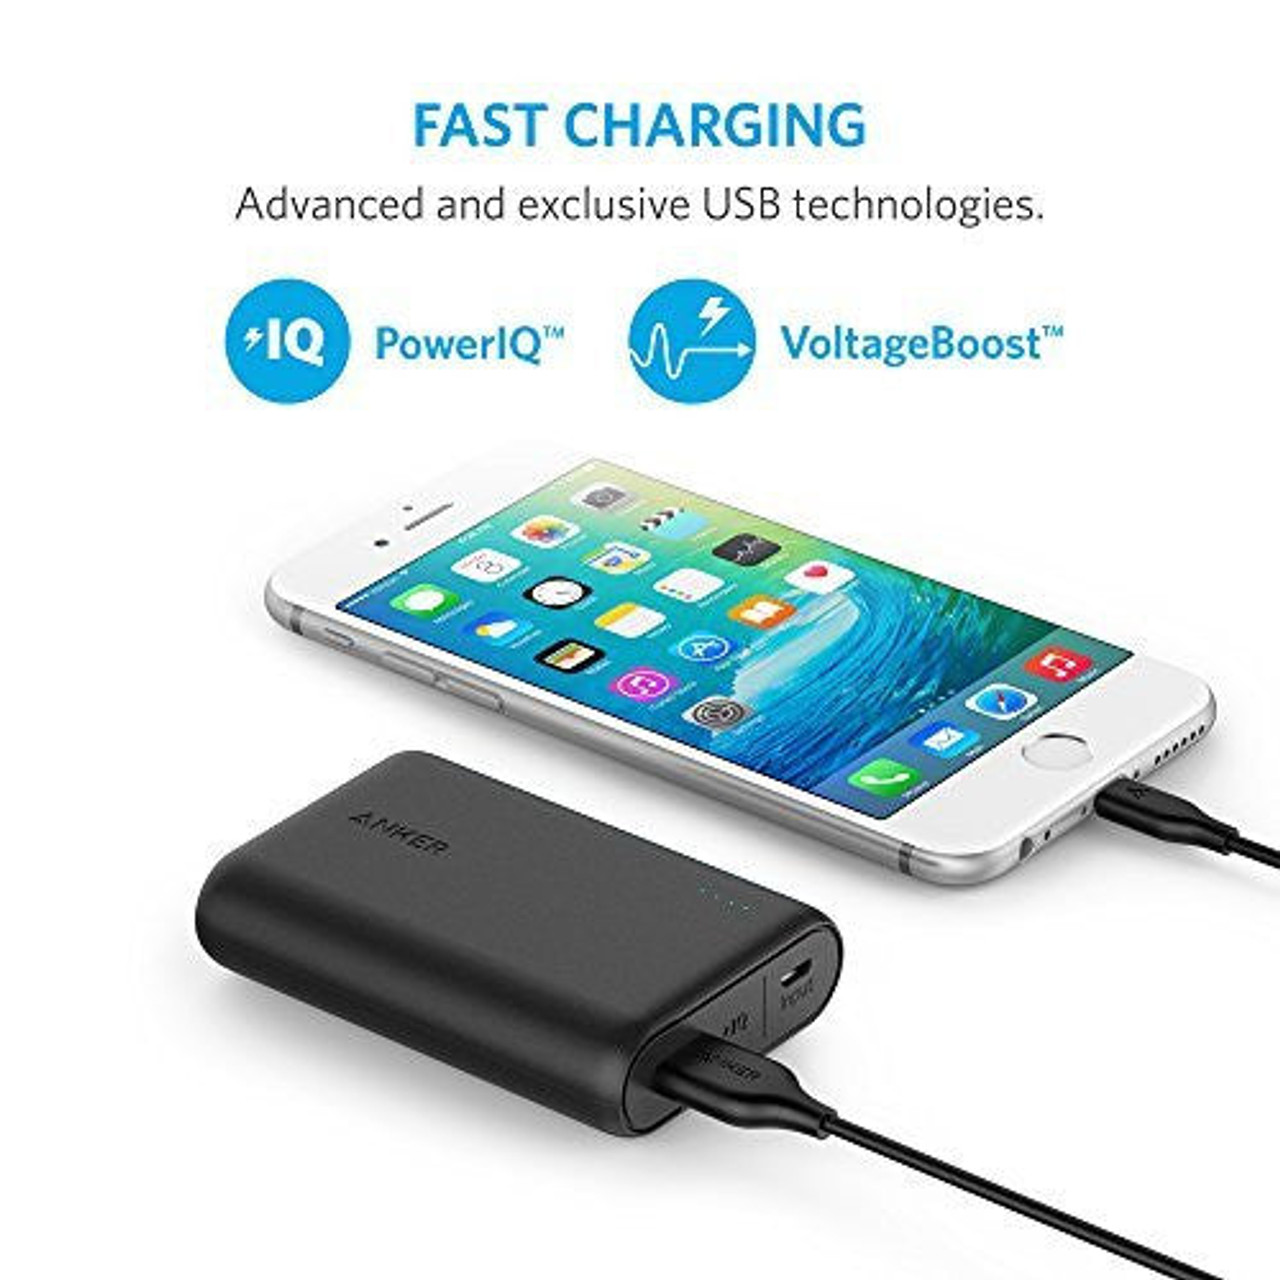 Anker PowerCore 10000mAh Portable Power Bank Battery Charger Fast Charging